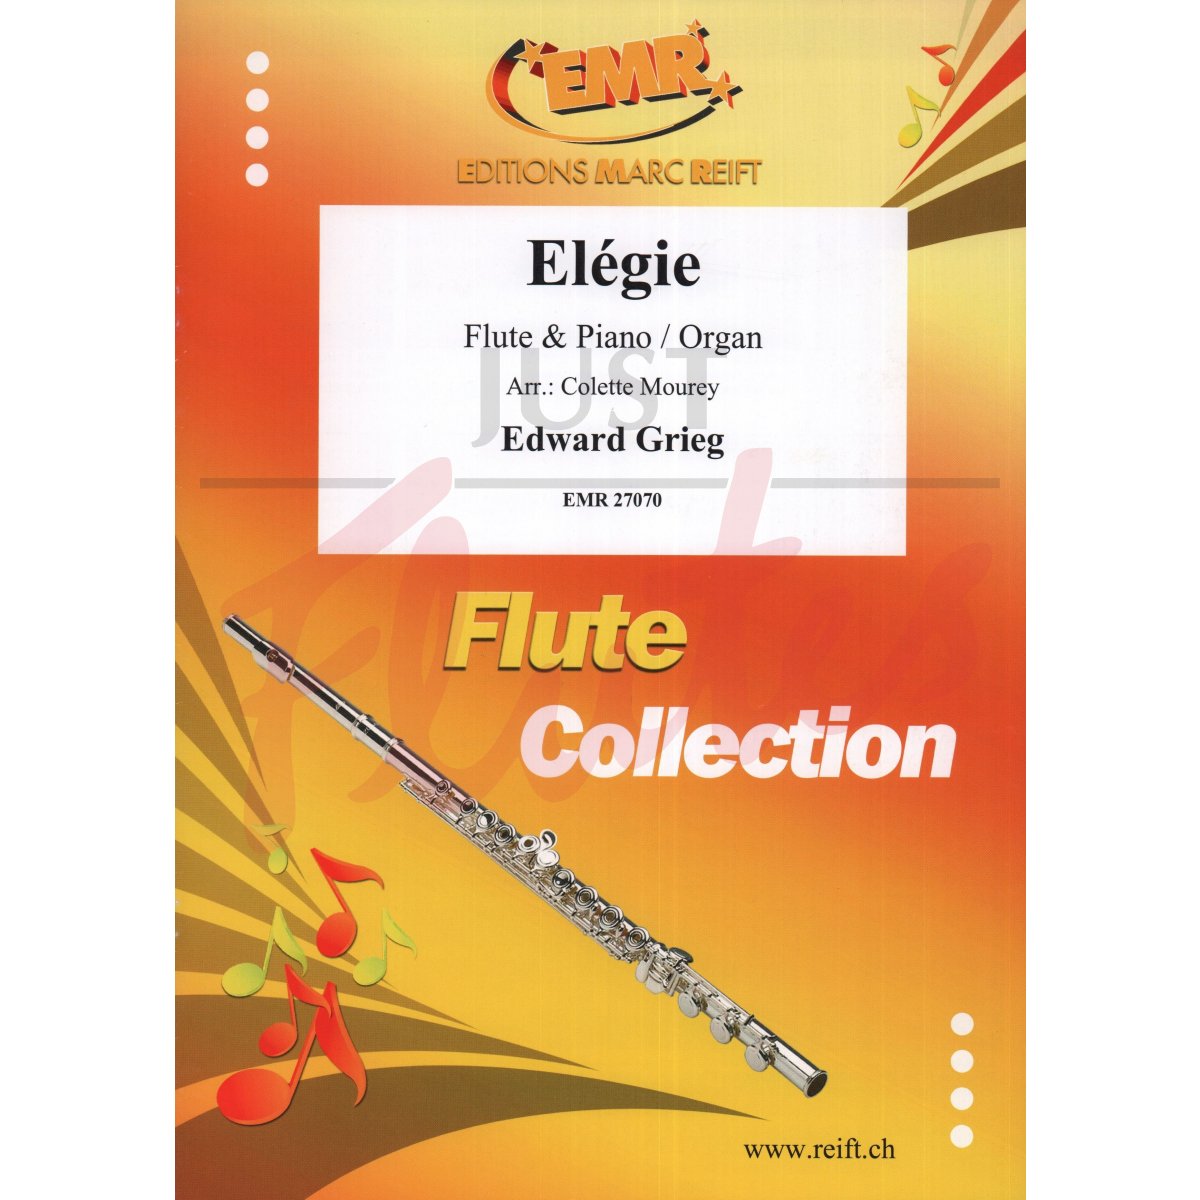 Elegie for Flute and Piano